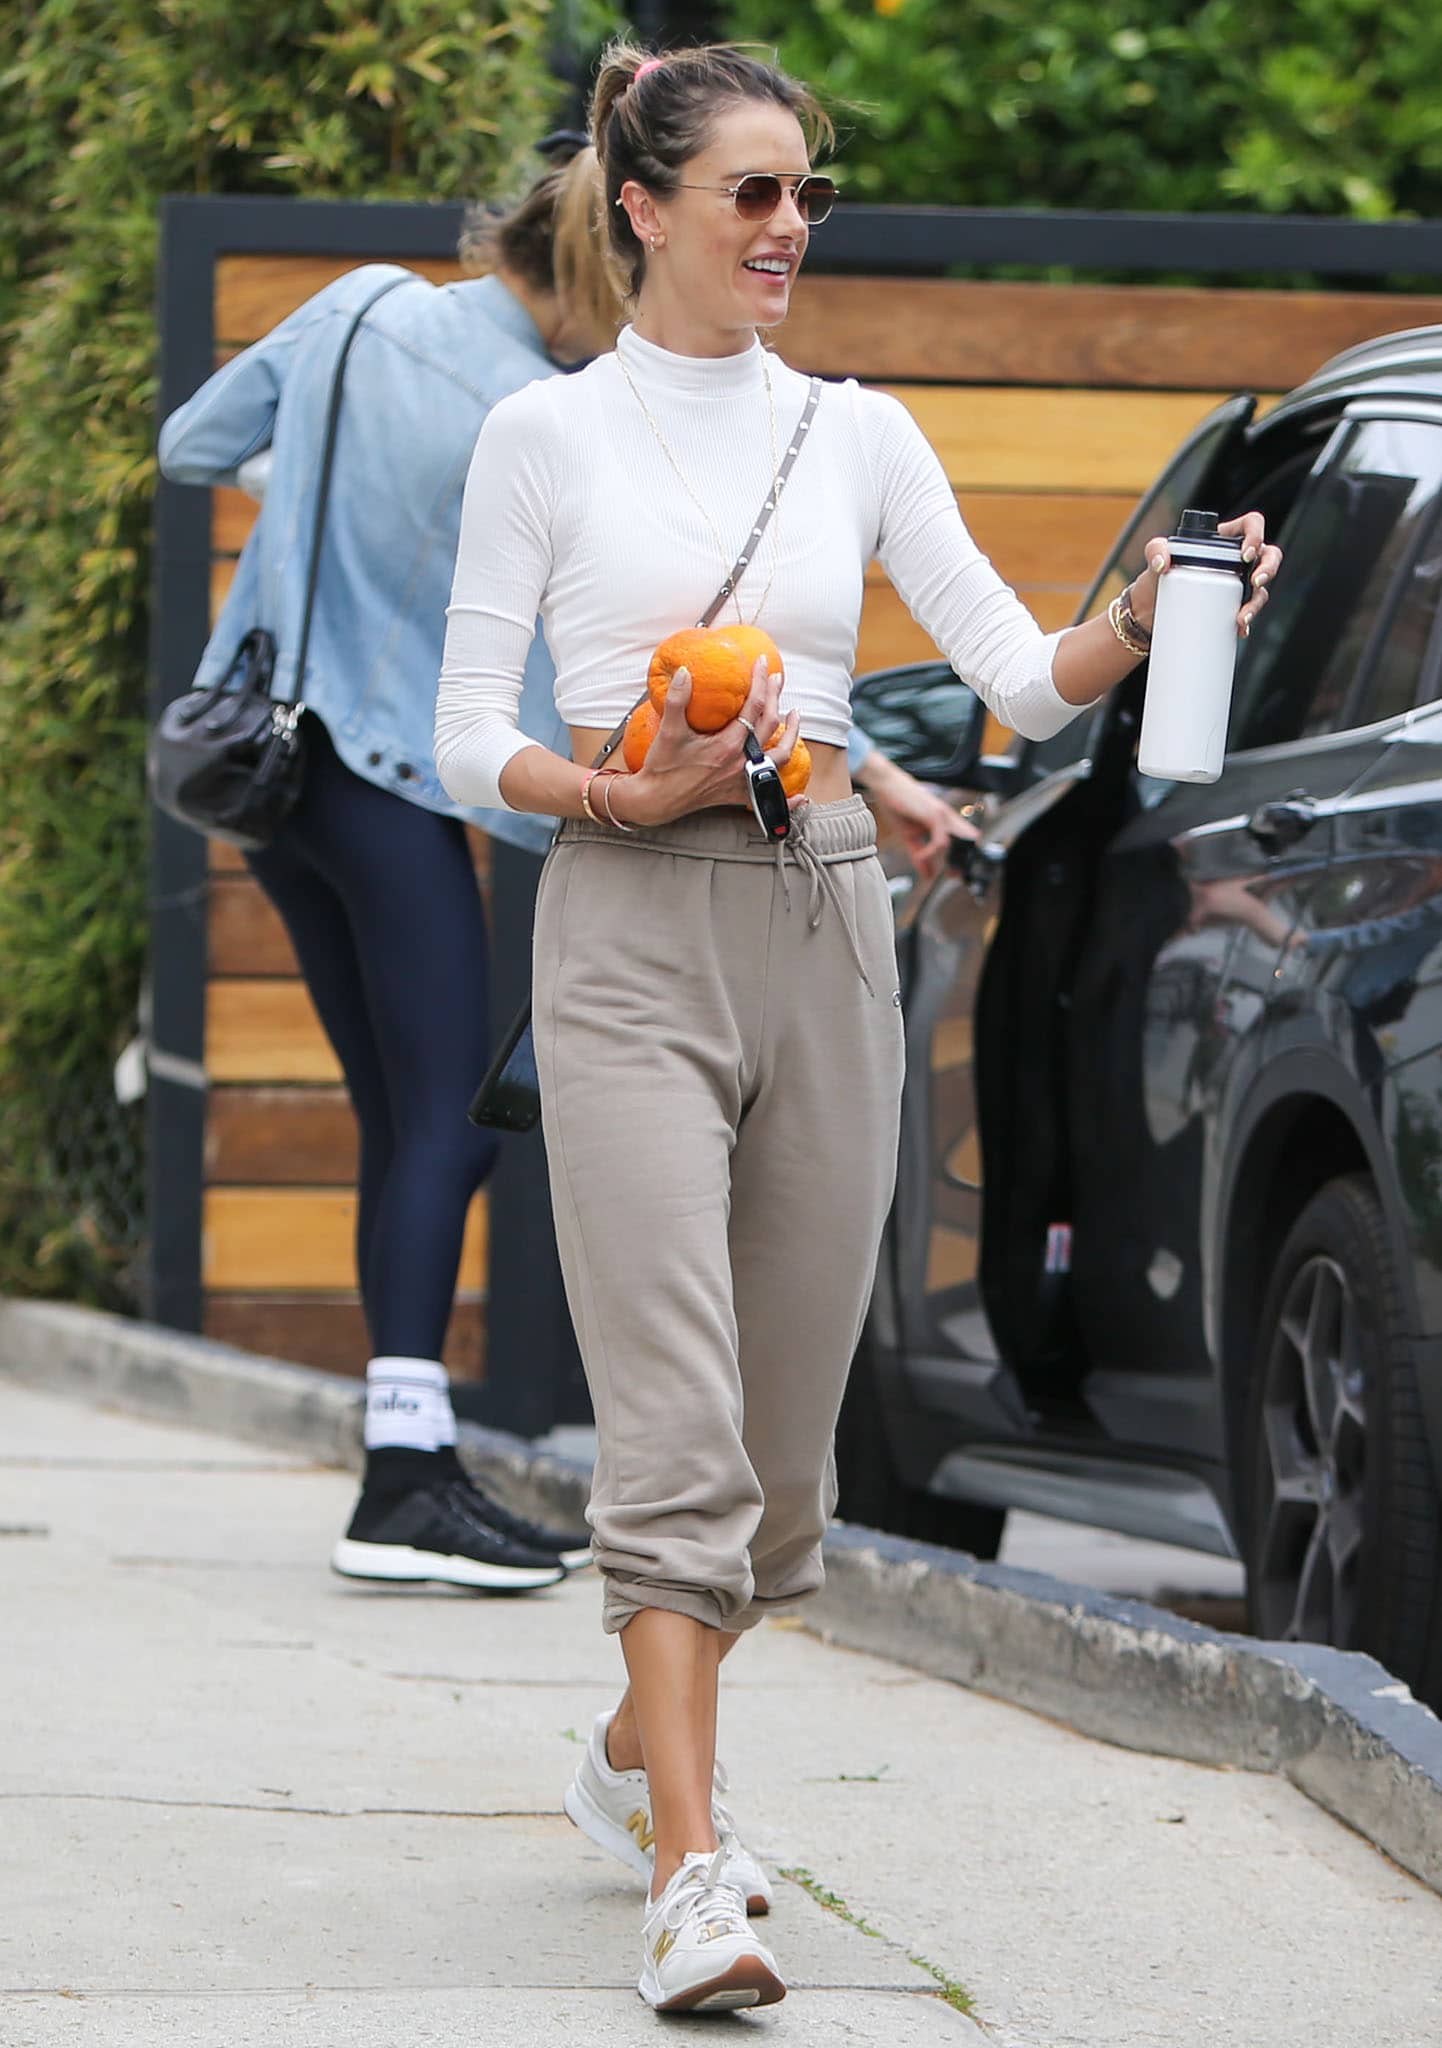 Alessandra Ambrosio leaves Pilates class in Alo Yoga white cropped sweater and Alo Yoga taupe sweatpants on April 22, 2021